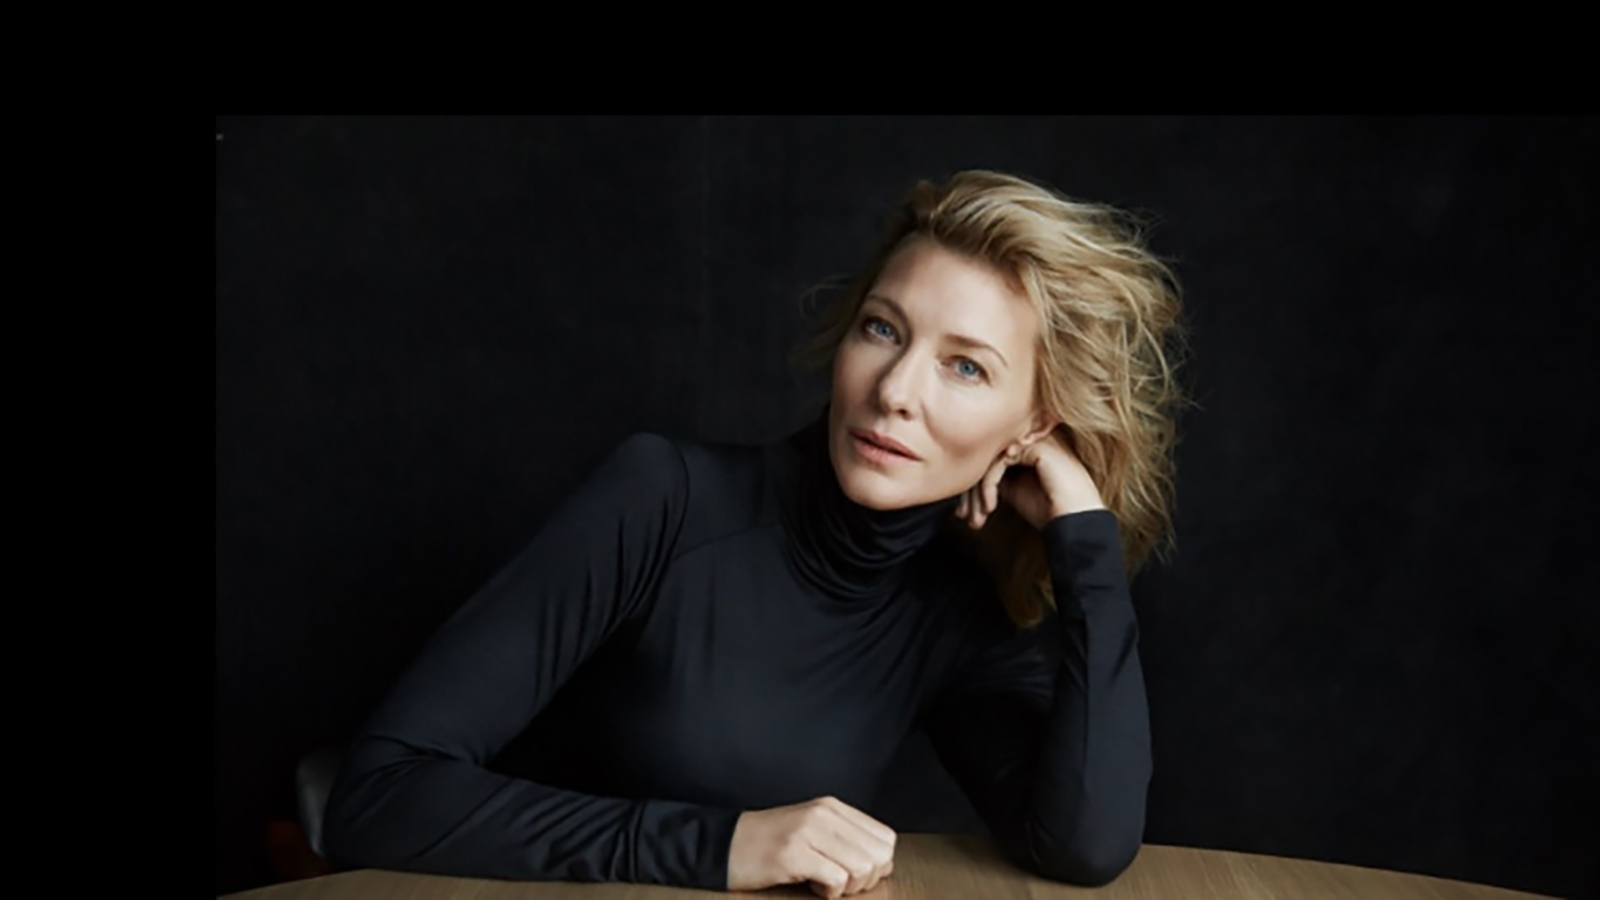 Cate Blanchett with her elbow on a table, wearing a black jumper against a black background